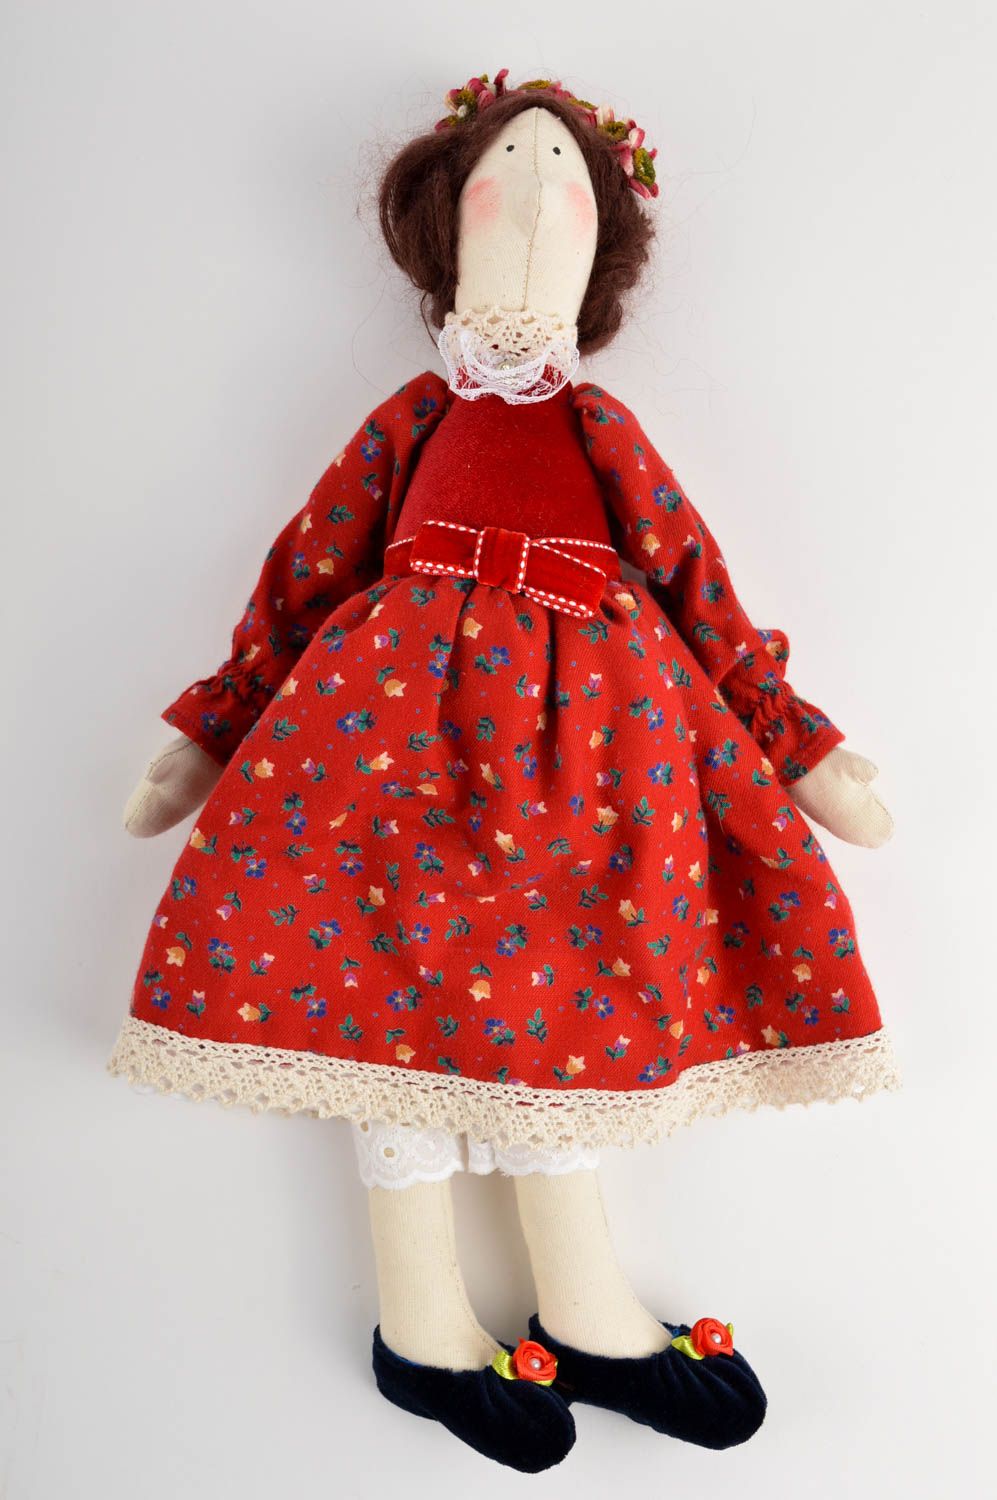 Handmade doll in red dress stuffed toy designer childrens toy decoration ideas photo 2